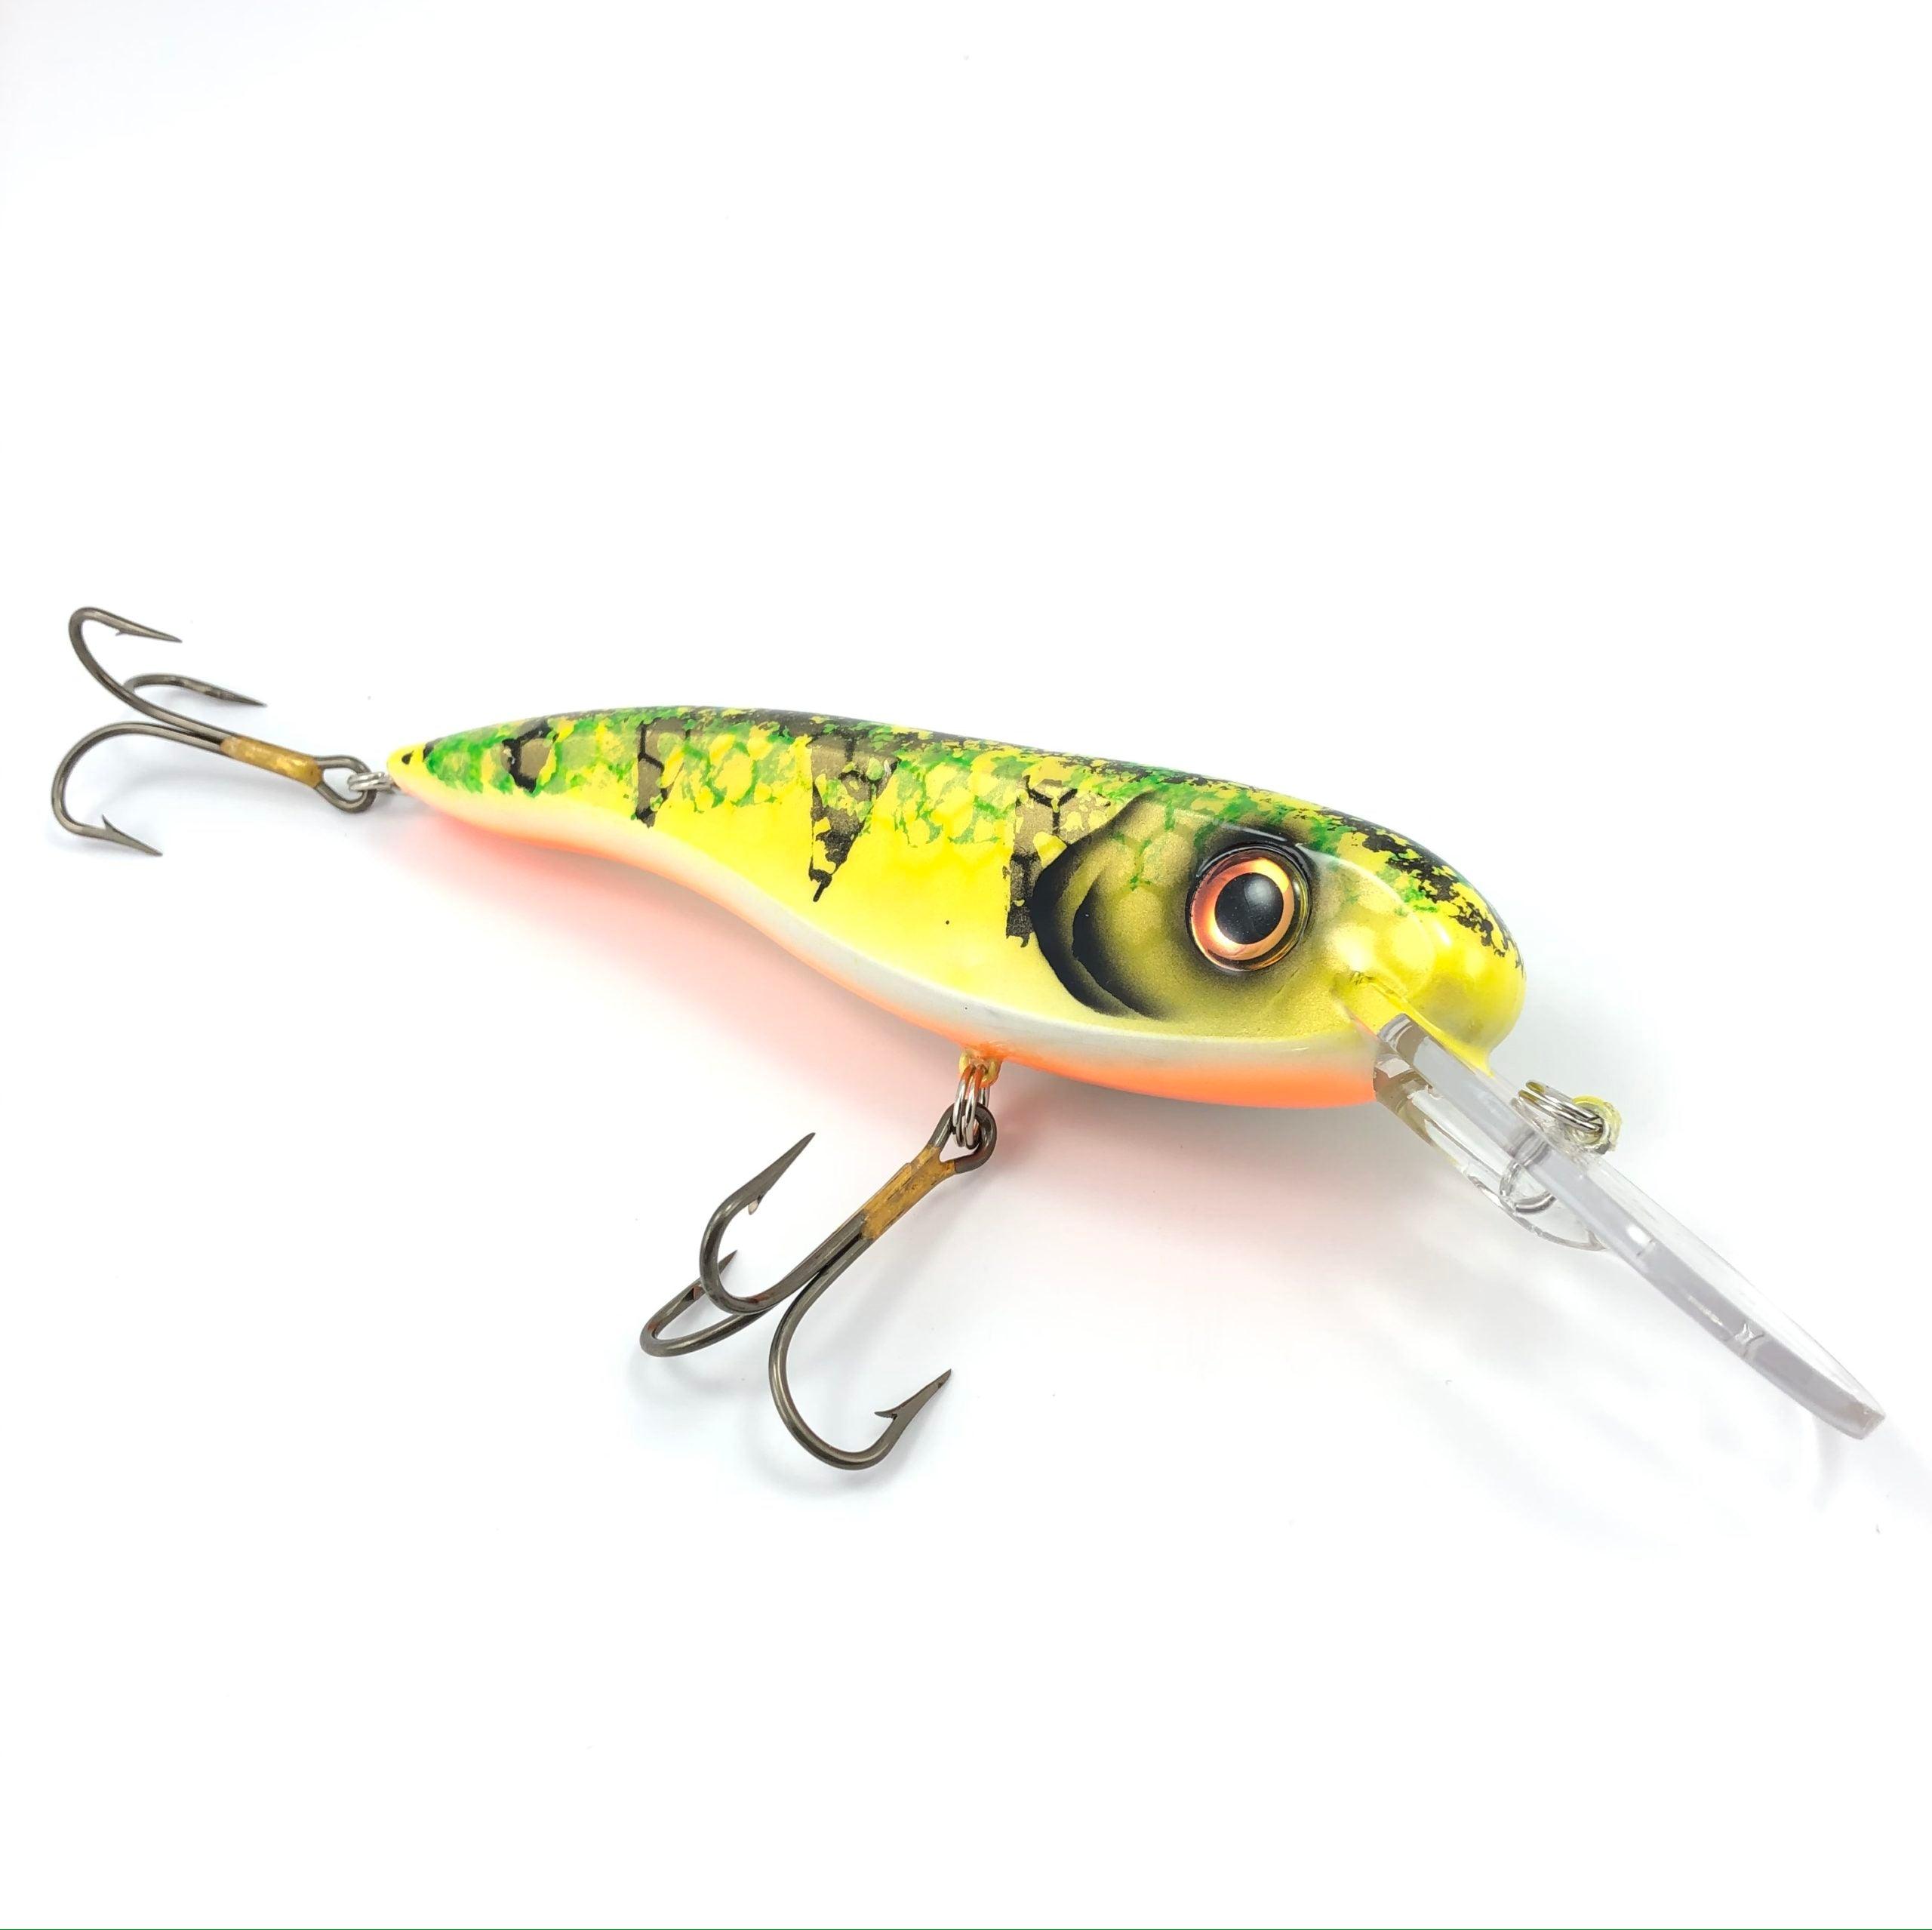 Llungen Lures  .22 Long – Taps and Tackle Co.